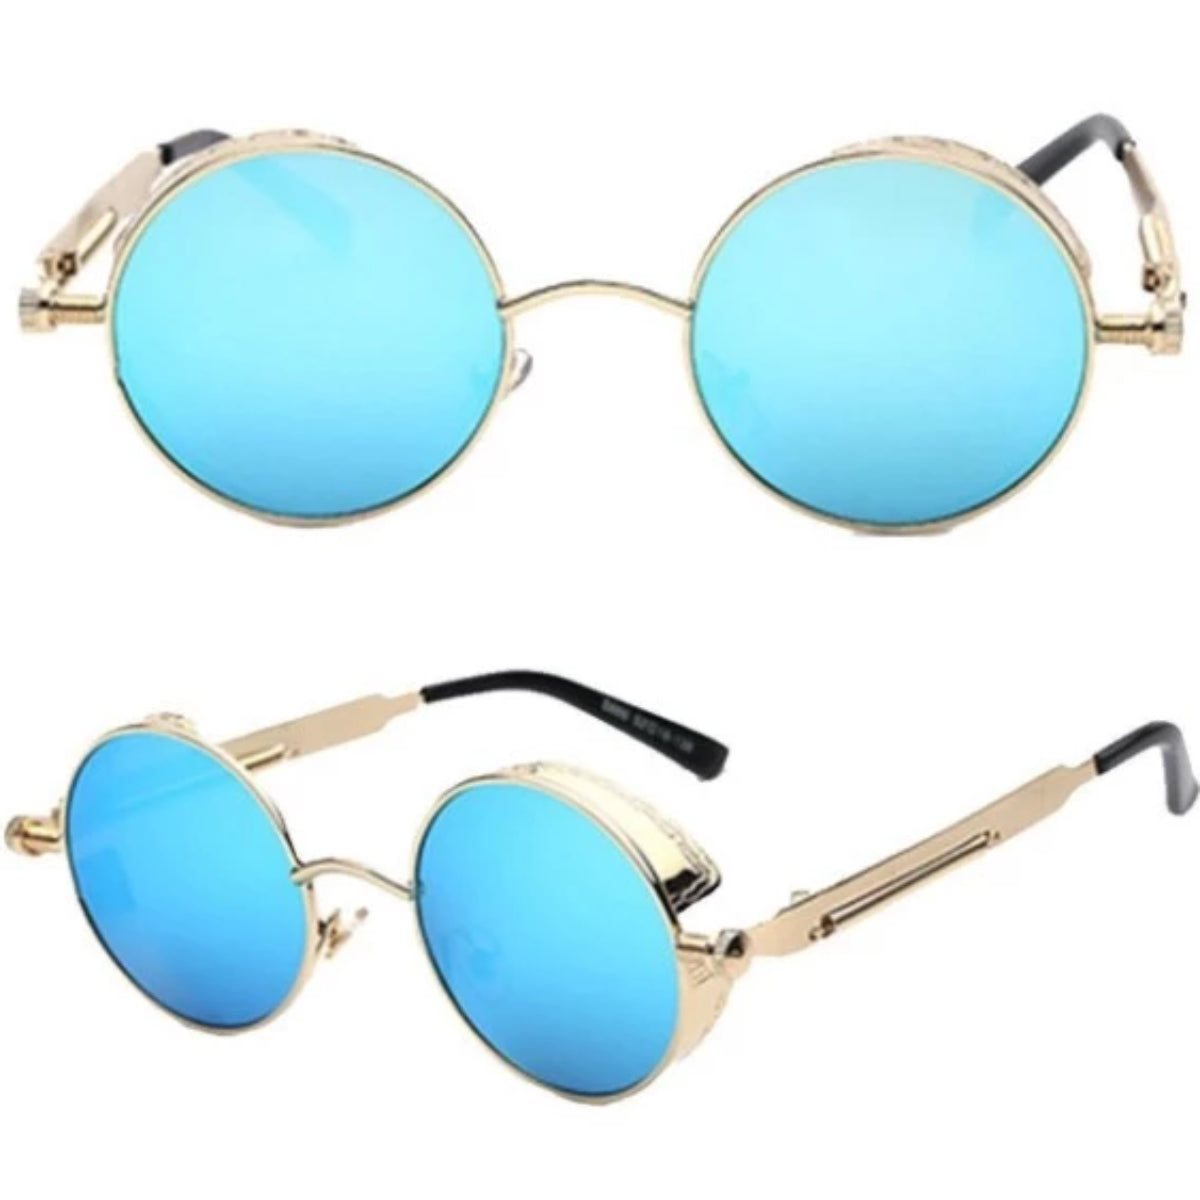 A pair of Rebel Steampunk Sunglasses plus Free 1% Er Ring Bundle with blue mirrored lenses, these sunglasses are a fashion statement and an expression of your rebellious side.